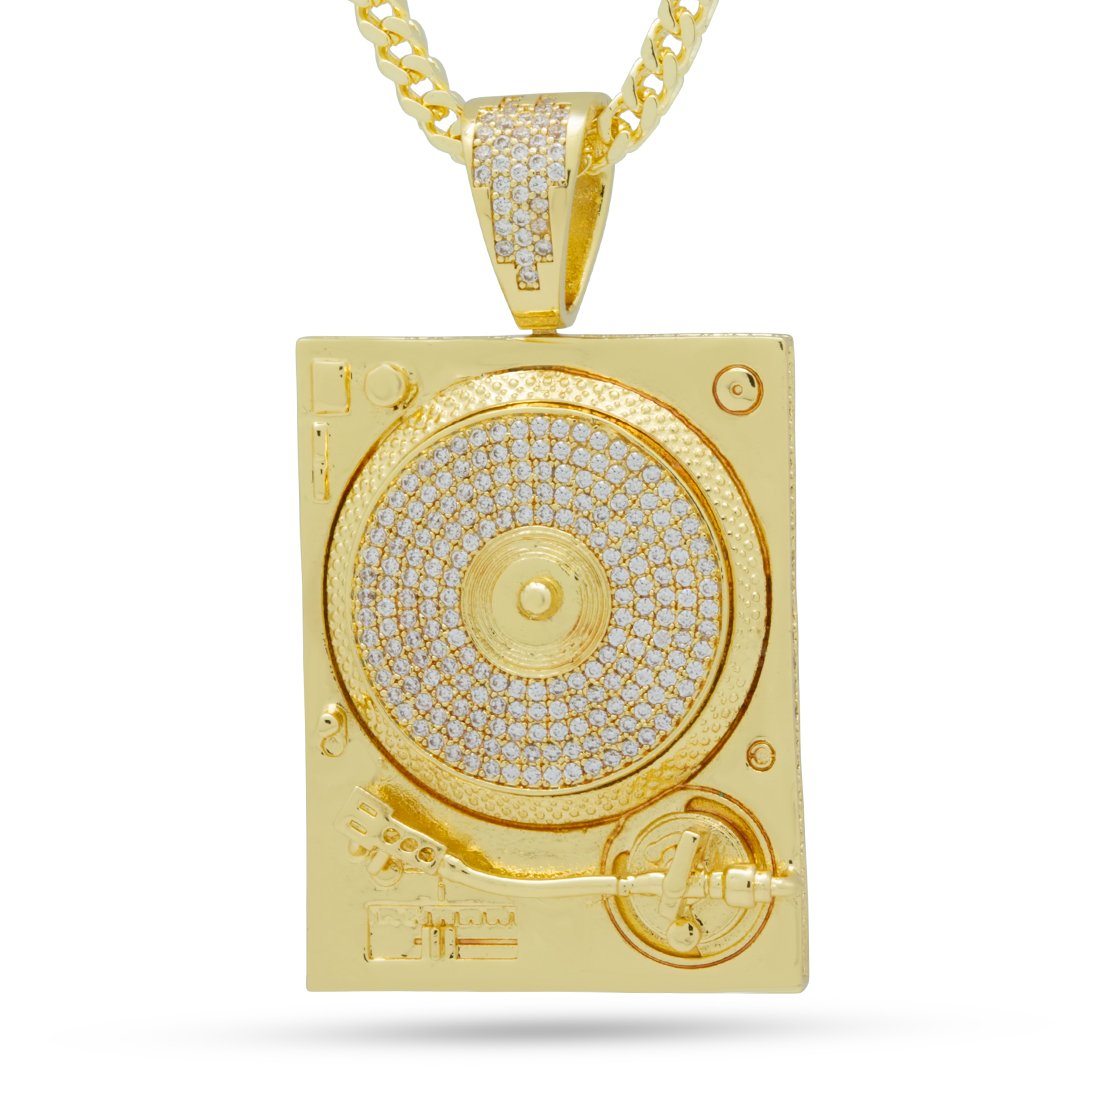 The Gold Turntable Necklace - Designed by Snoop Dogg x King Ice